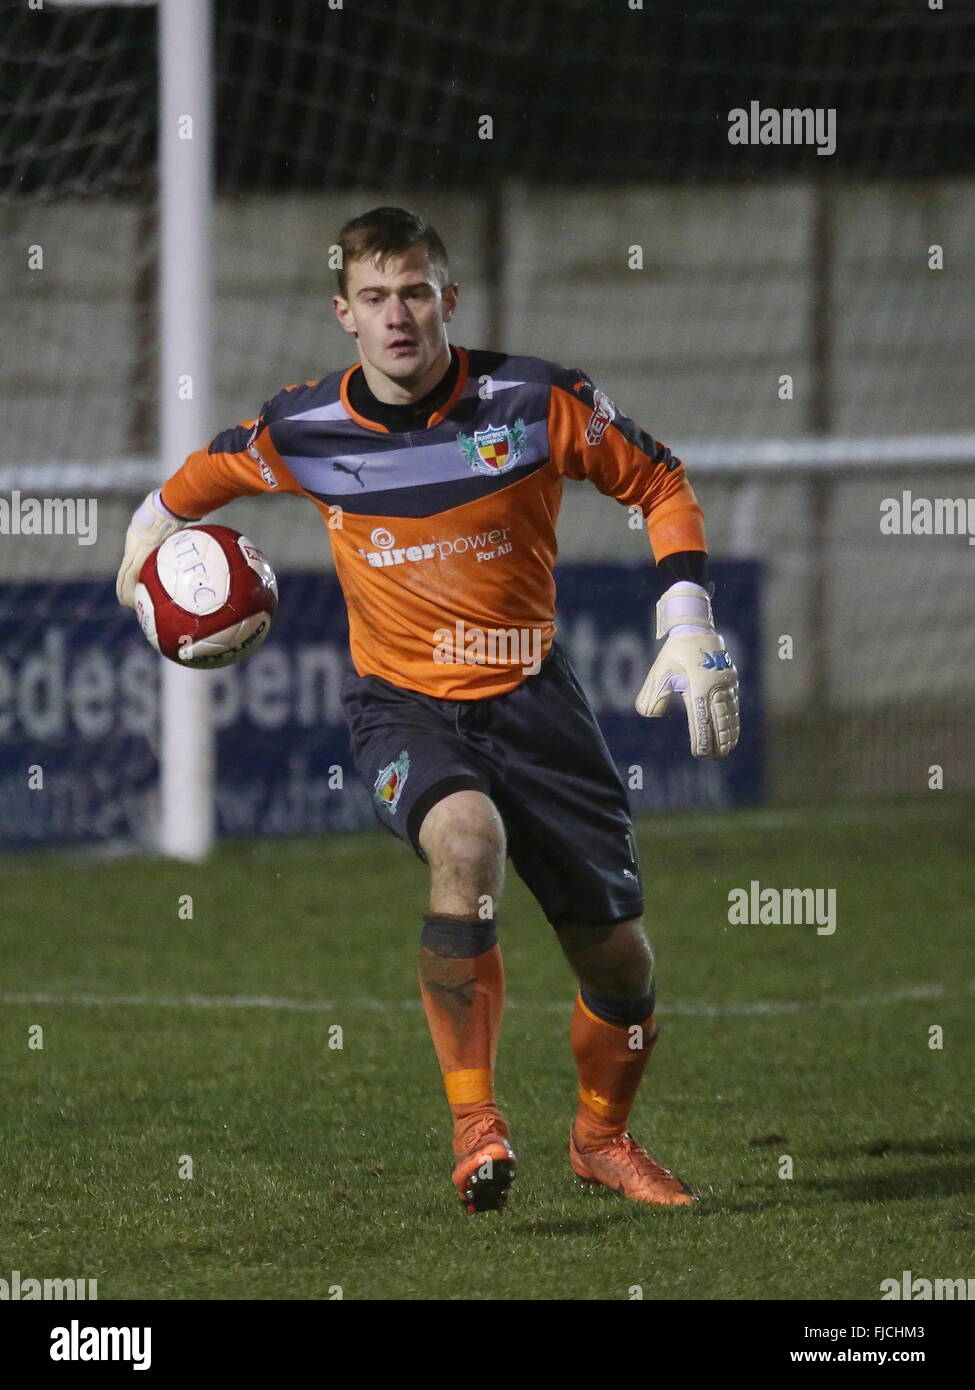 Nantwich, Cheshire, UK. 1st March, 2016. Nantwich Town goalkeeper Krystian Burzynski in action during the Integro Doodson Sports Cup match between Nantwich Town and Bamber Bridge at the Weaver Stadium. Credit:  Simon Newbury/Alamy Live News Stock Photo